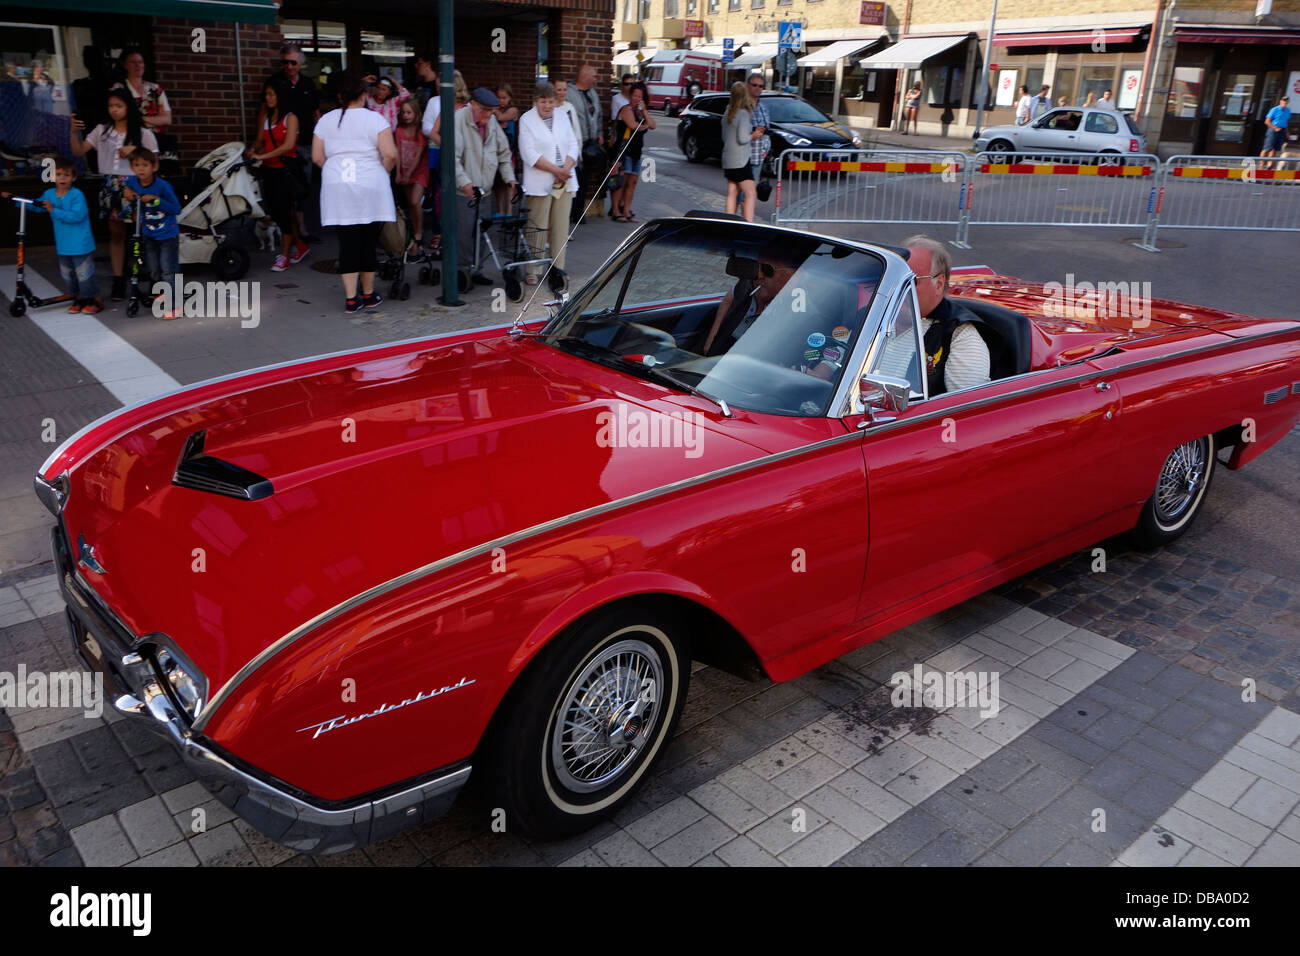 Two elderly men ride in the Red (1962) Ford Thunderbird Sports Roadster classic car. On the road in Varberg town, Sweden Stock Photo